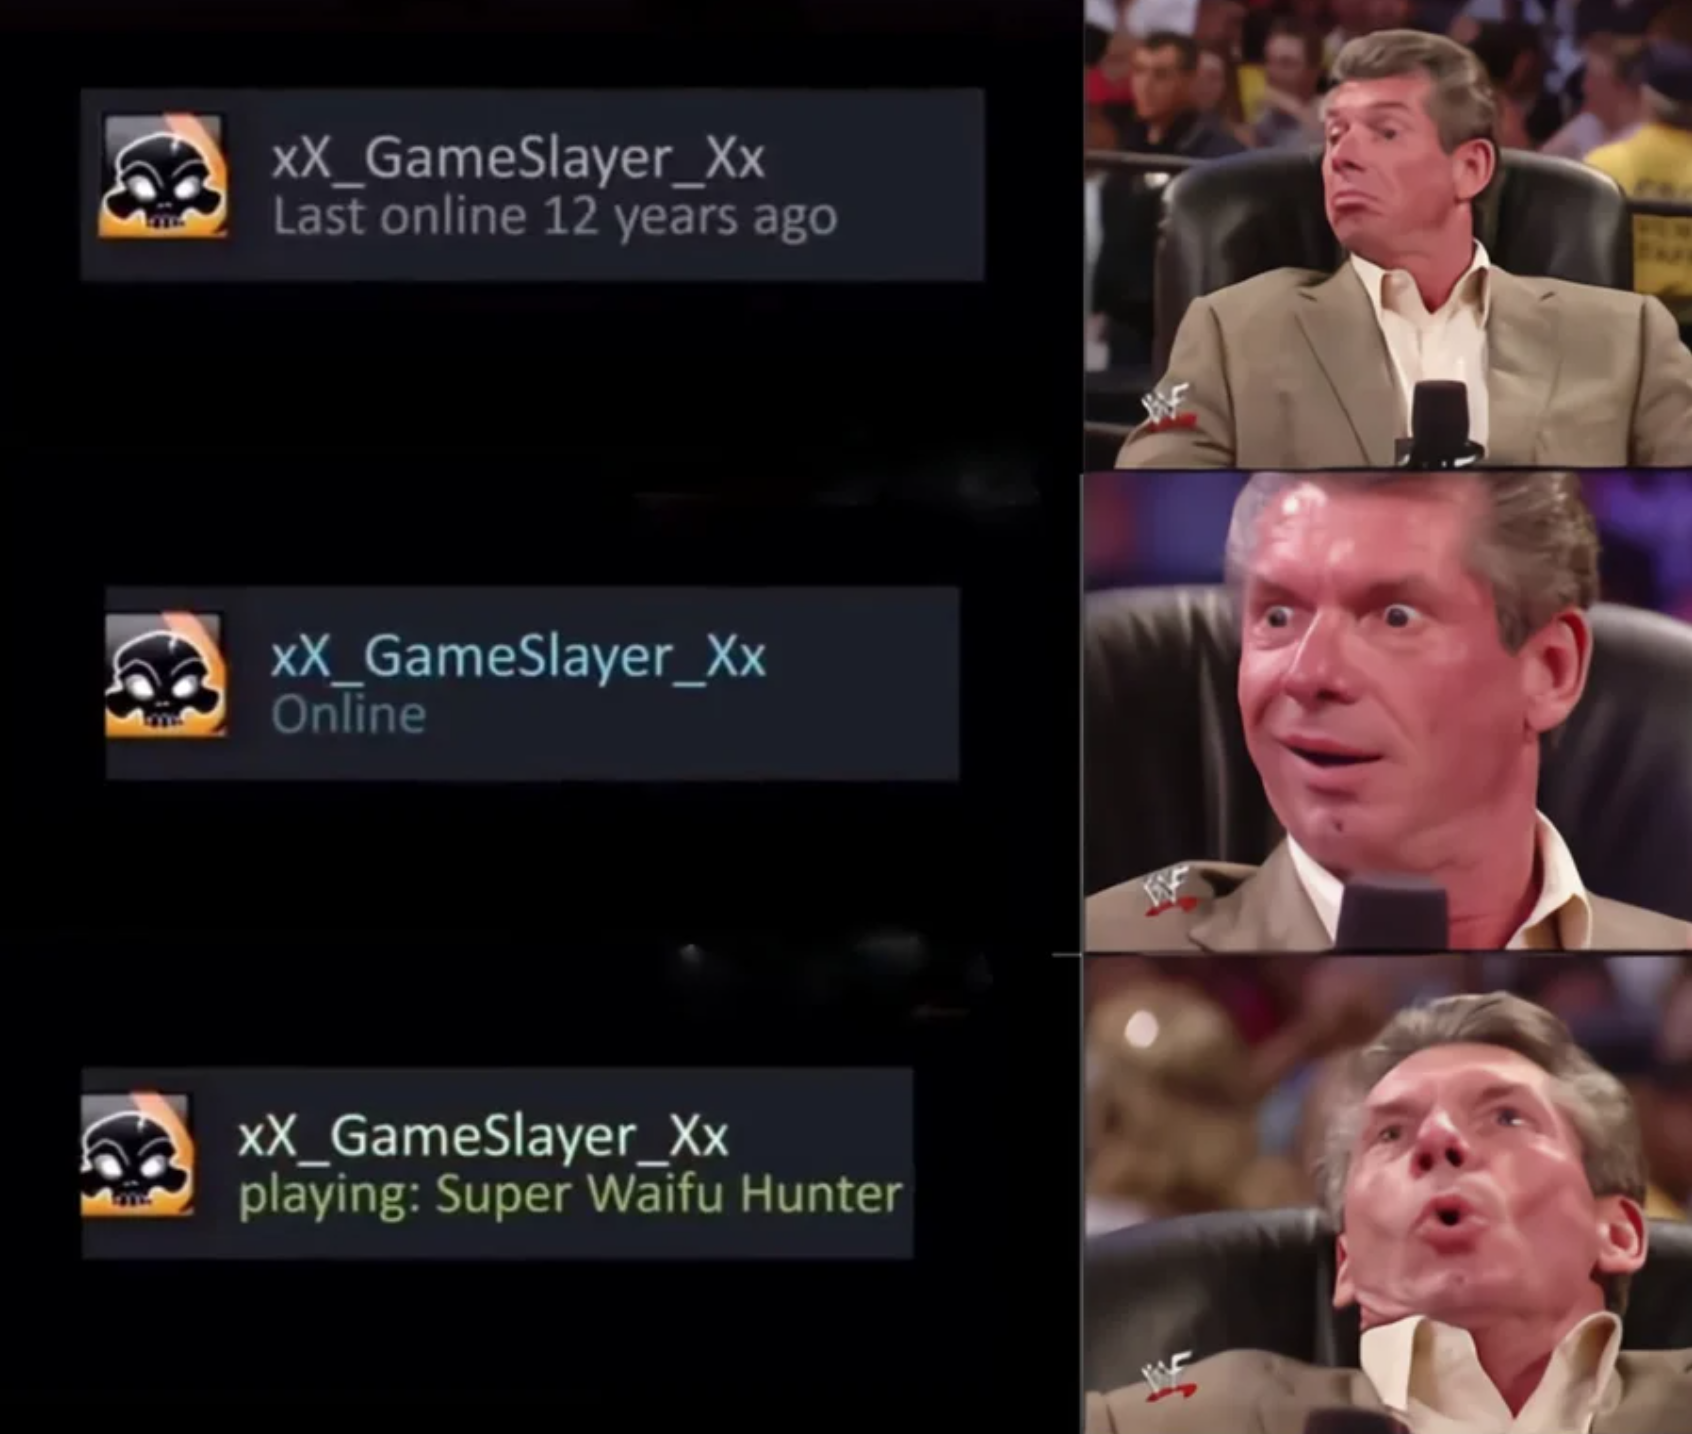 funny gaming memes - vince mcmahon meme template - XX_GameSlayer_Xx Last online 12 years ago XX_GameSlayer_Xx Online XX_GameSlayer_Xx playing Super Waifu Hunter